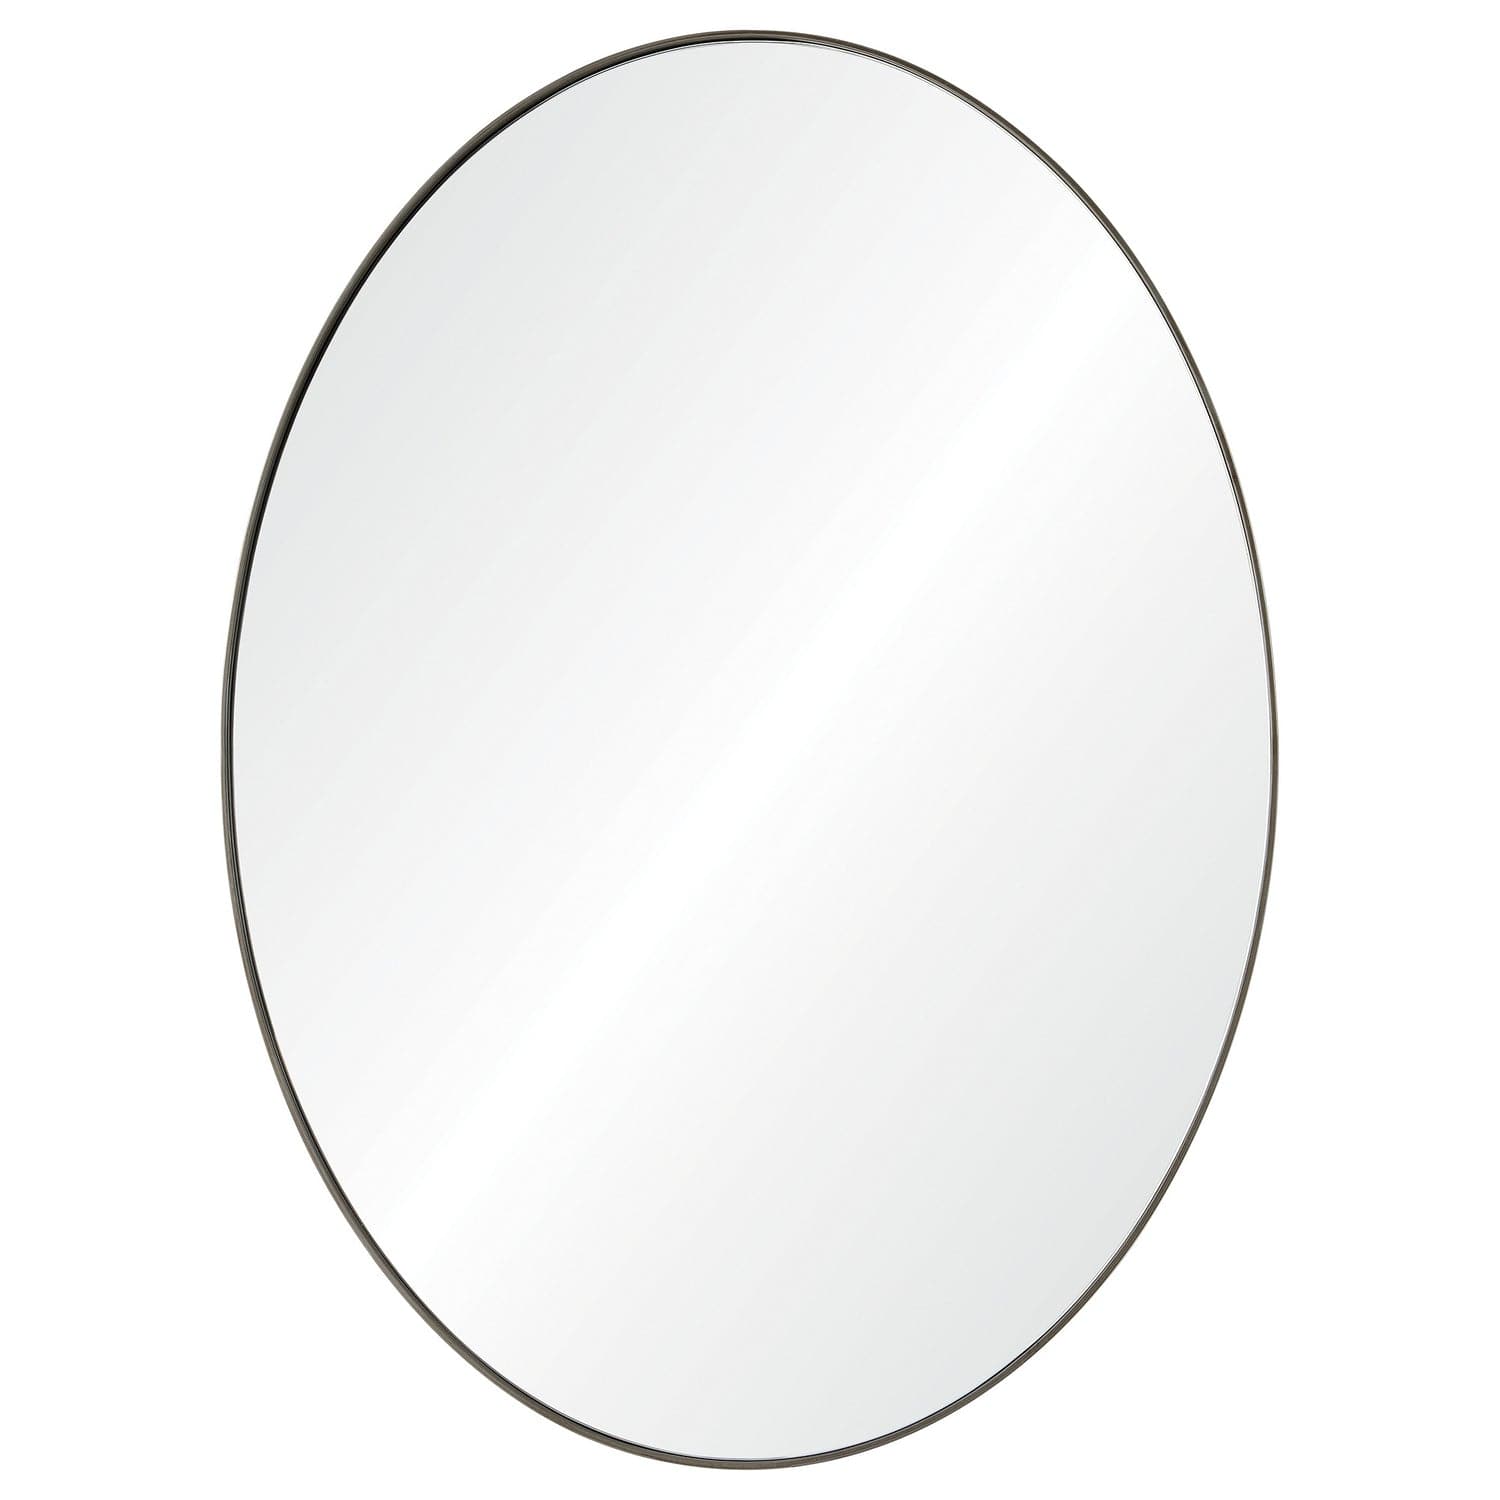 Renwil - MT1843 - Mirror - Newport - Antique Brushed Silver